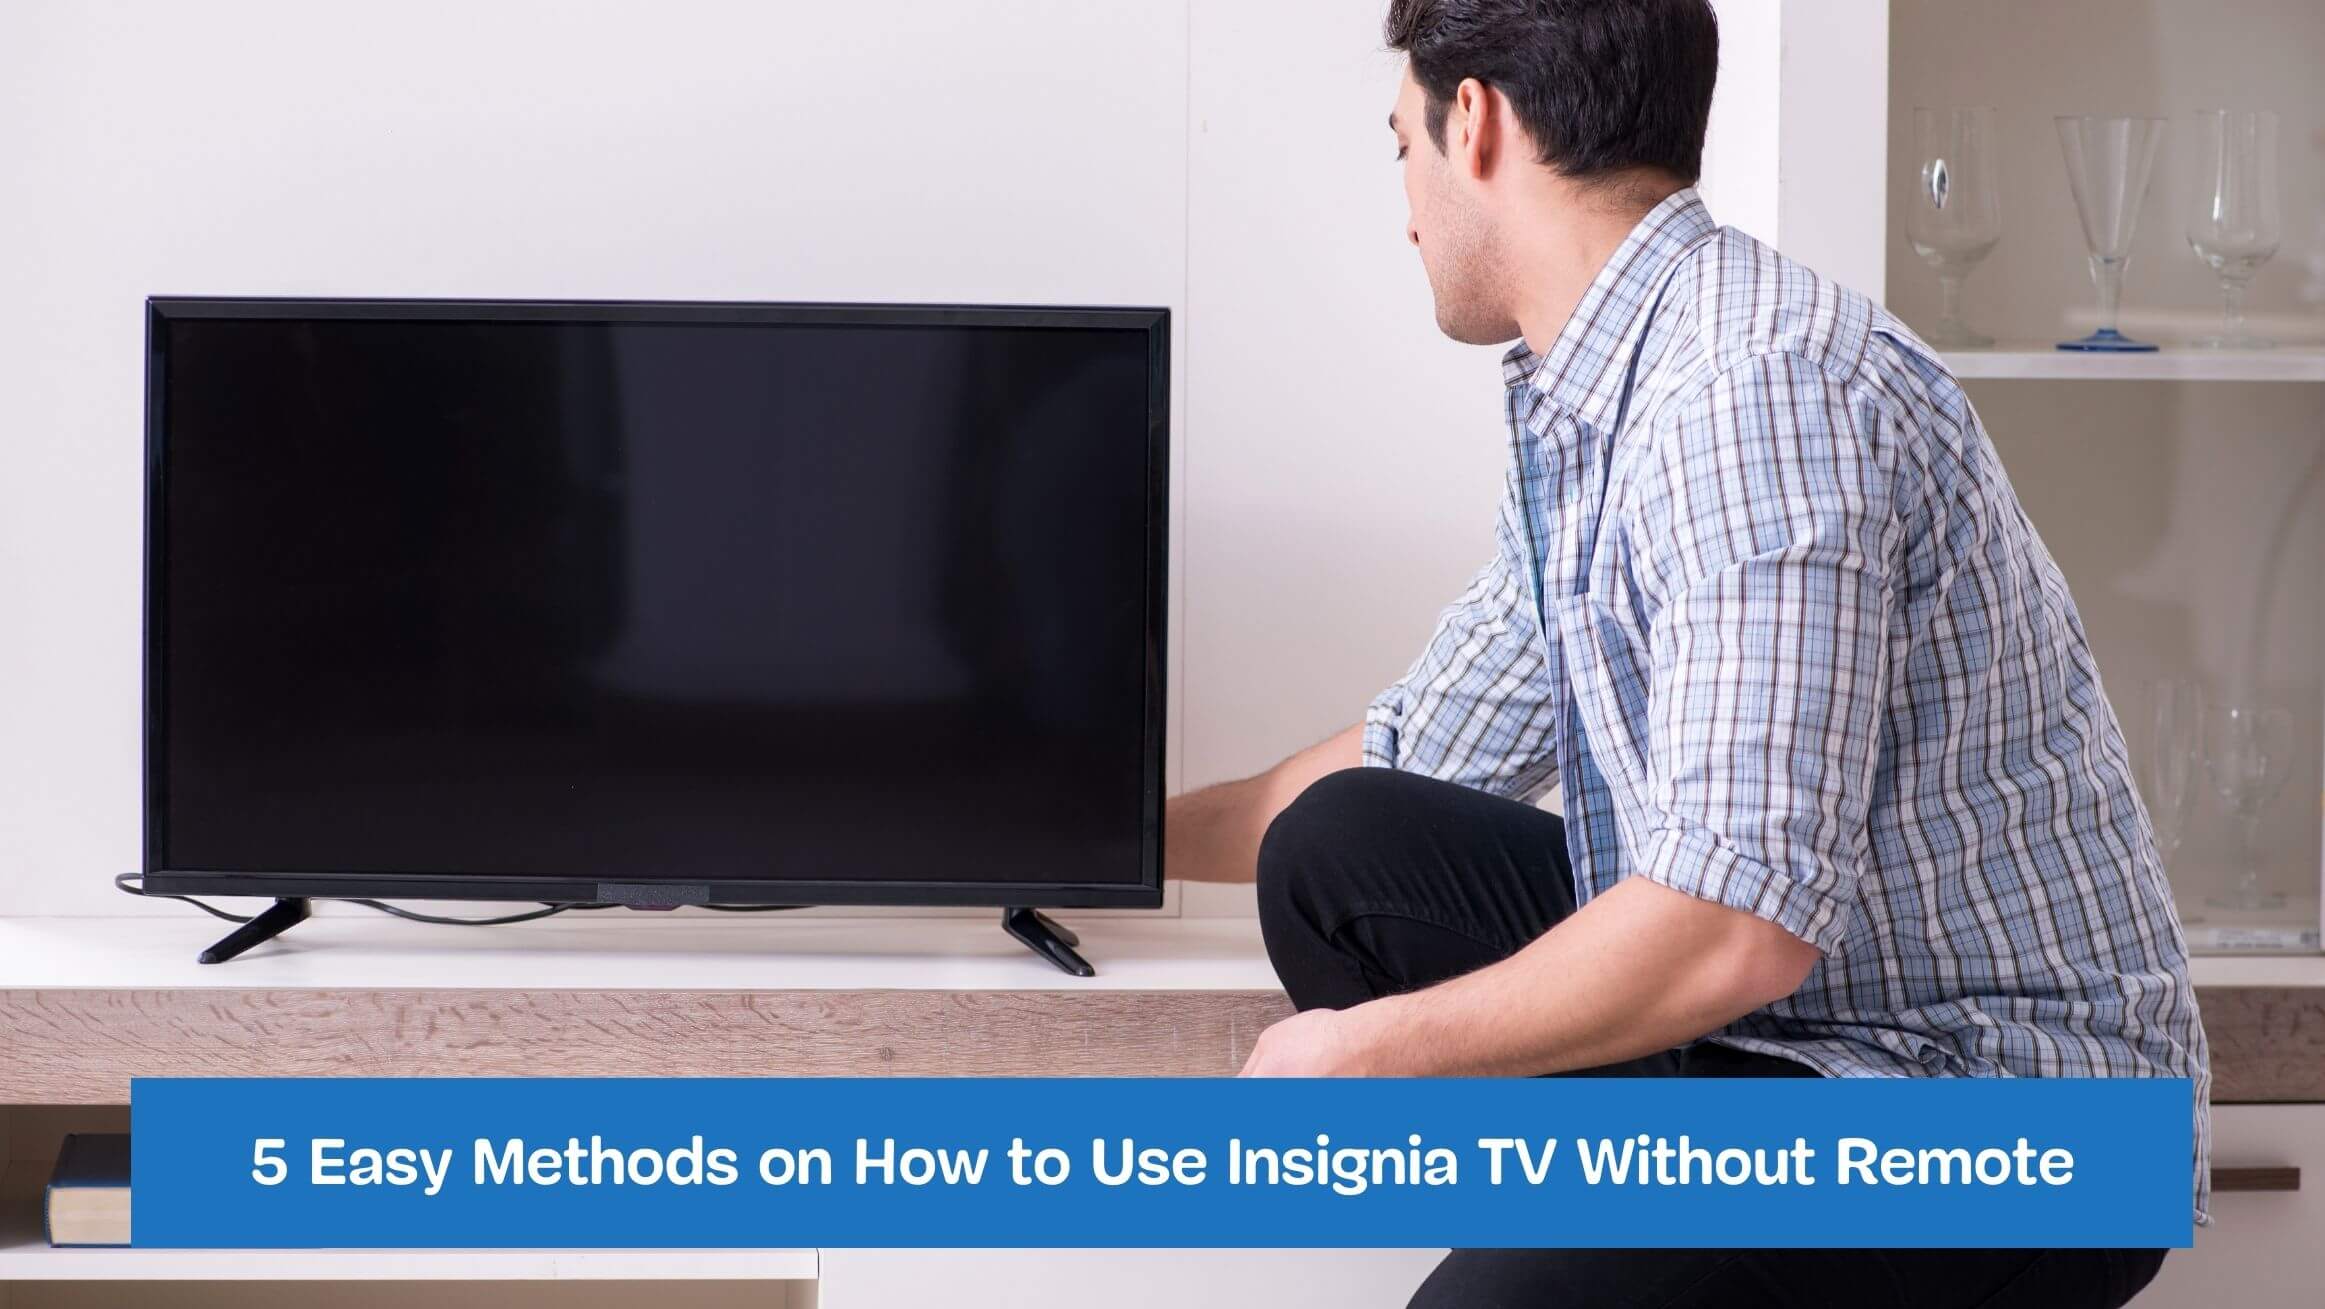 5 Easy Methods on How to Use Insignia TV Without Remote